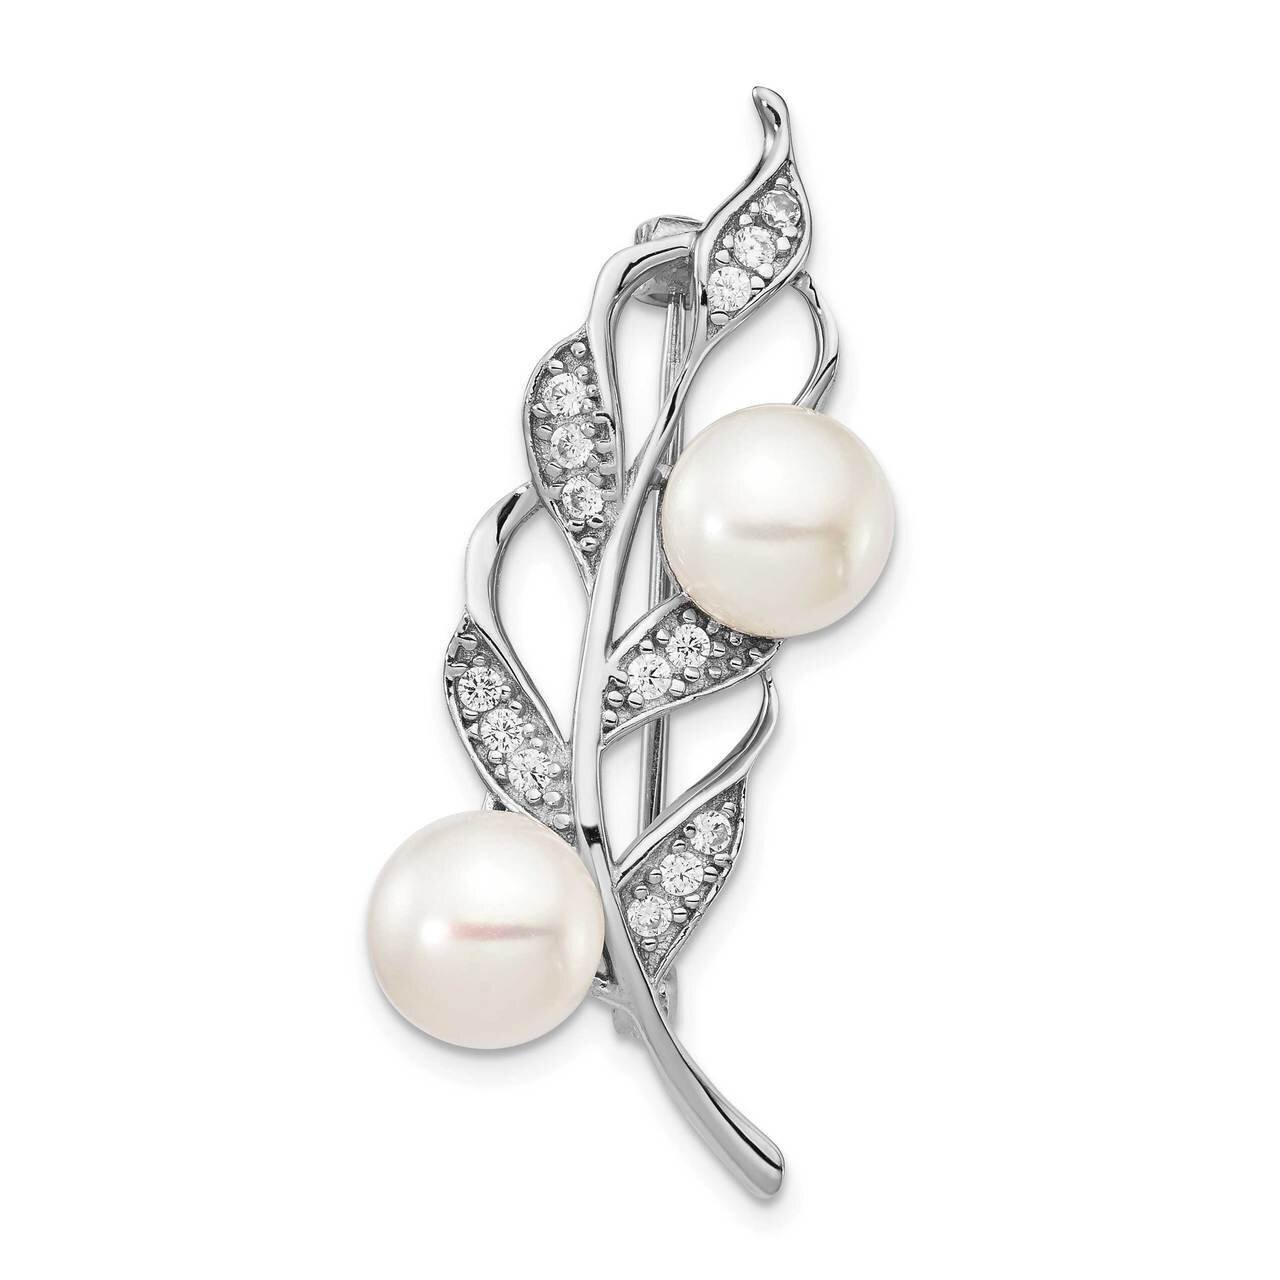 7-8mm White Button Freshwater Cultured Pearl CZ Diamond Brooch Sterling Silver Rhodium Plated QP5046